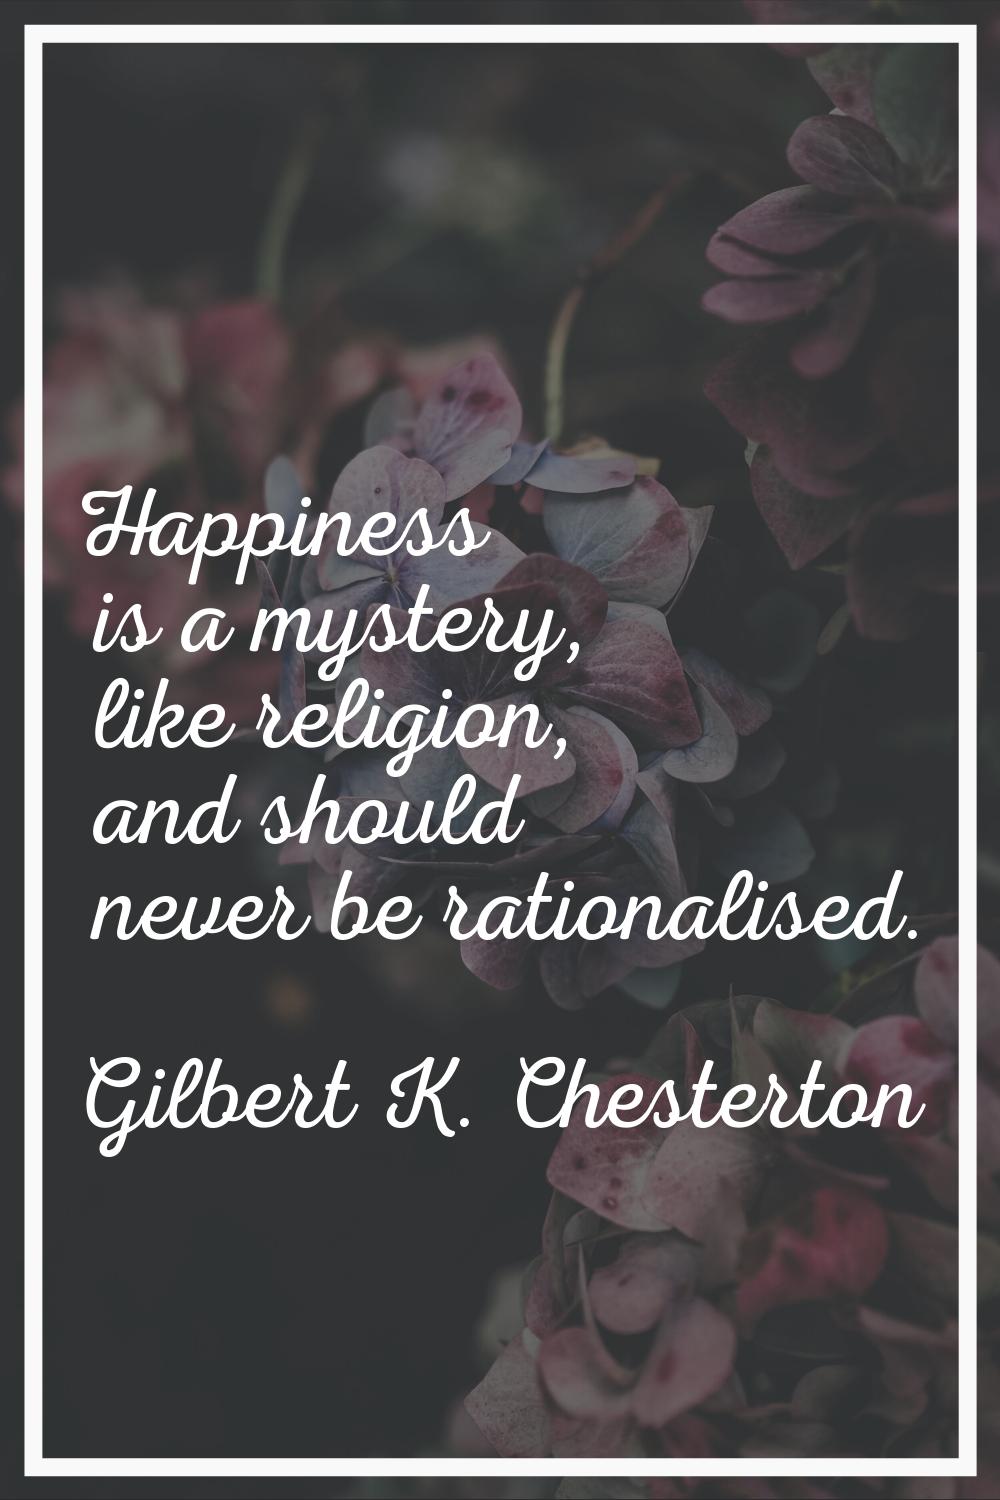 Happiness is a mystery, like religion, and should never be rationalised.